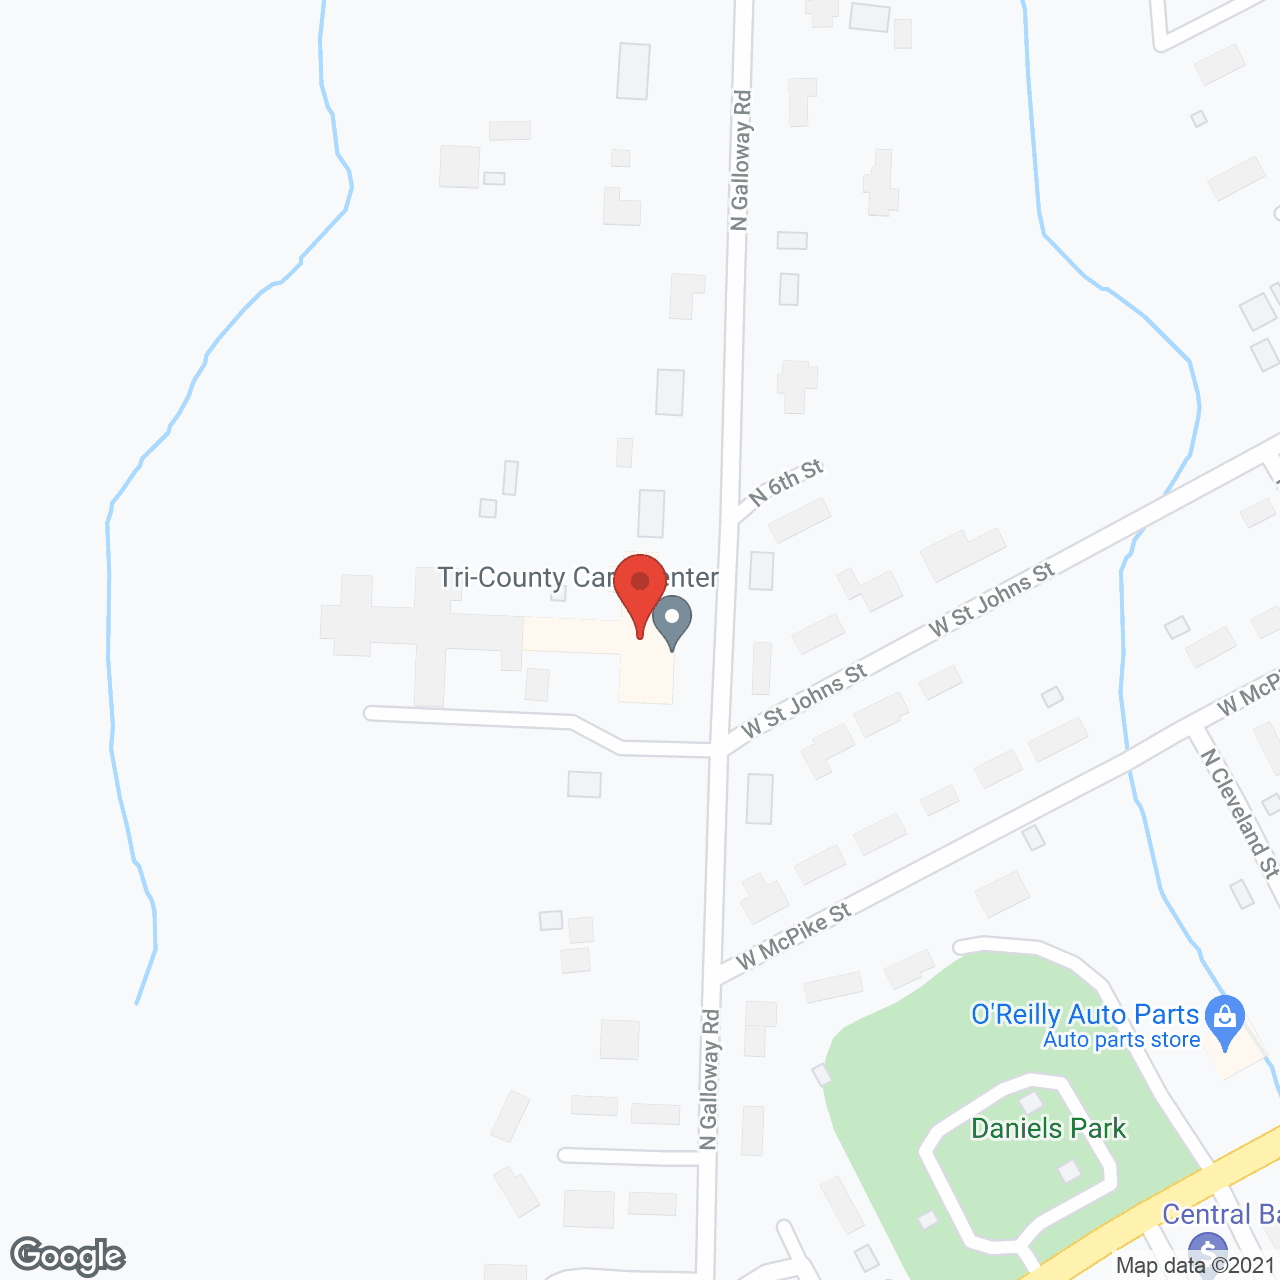 Tri-County Care Ctr in google map